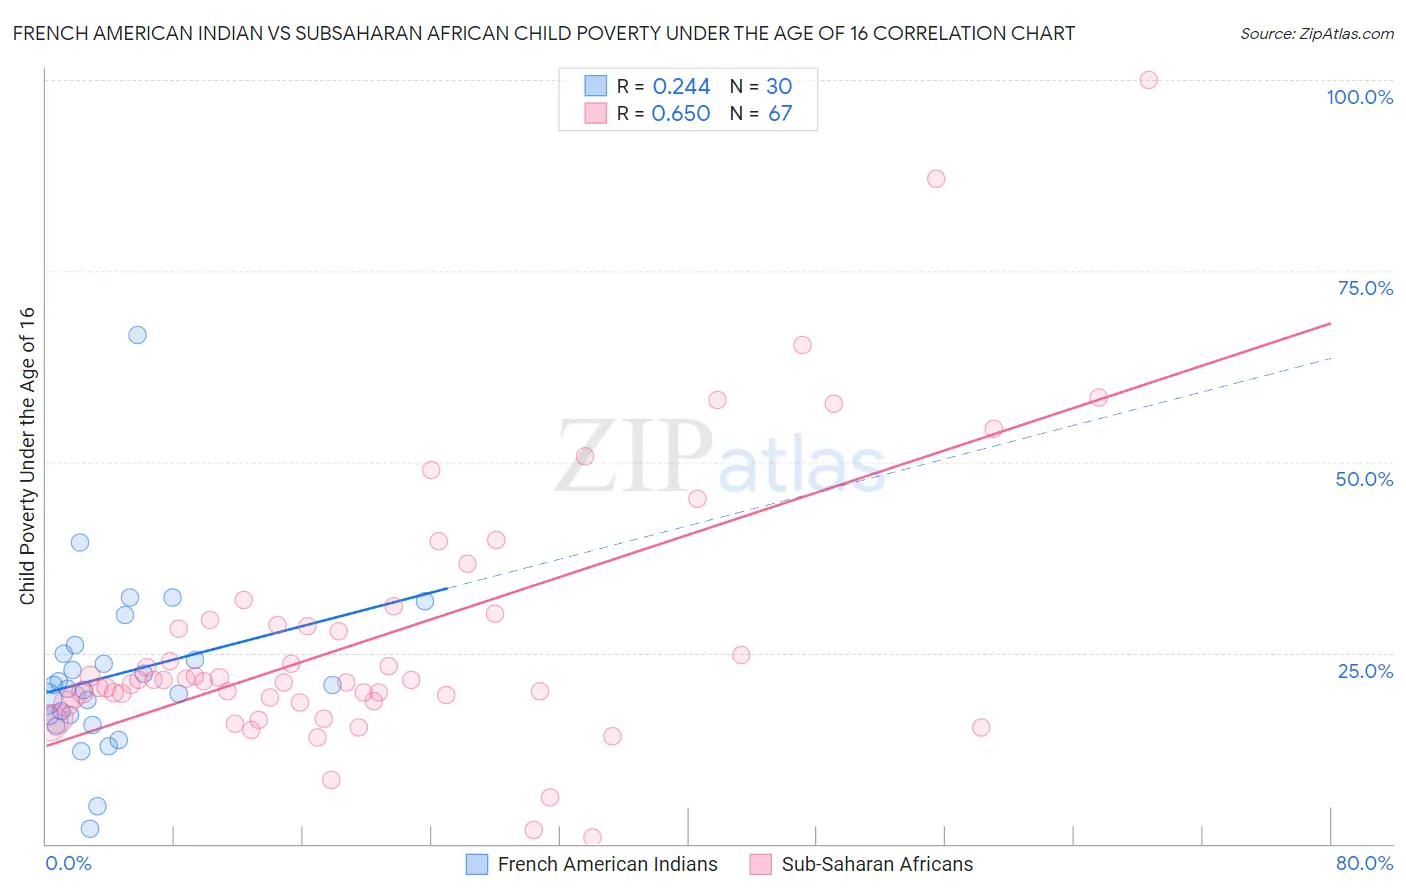 French American Indian vs Subsaharan African Child Poverty Under the Age of 16